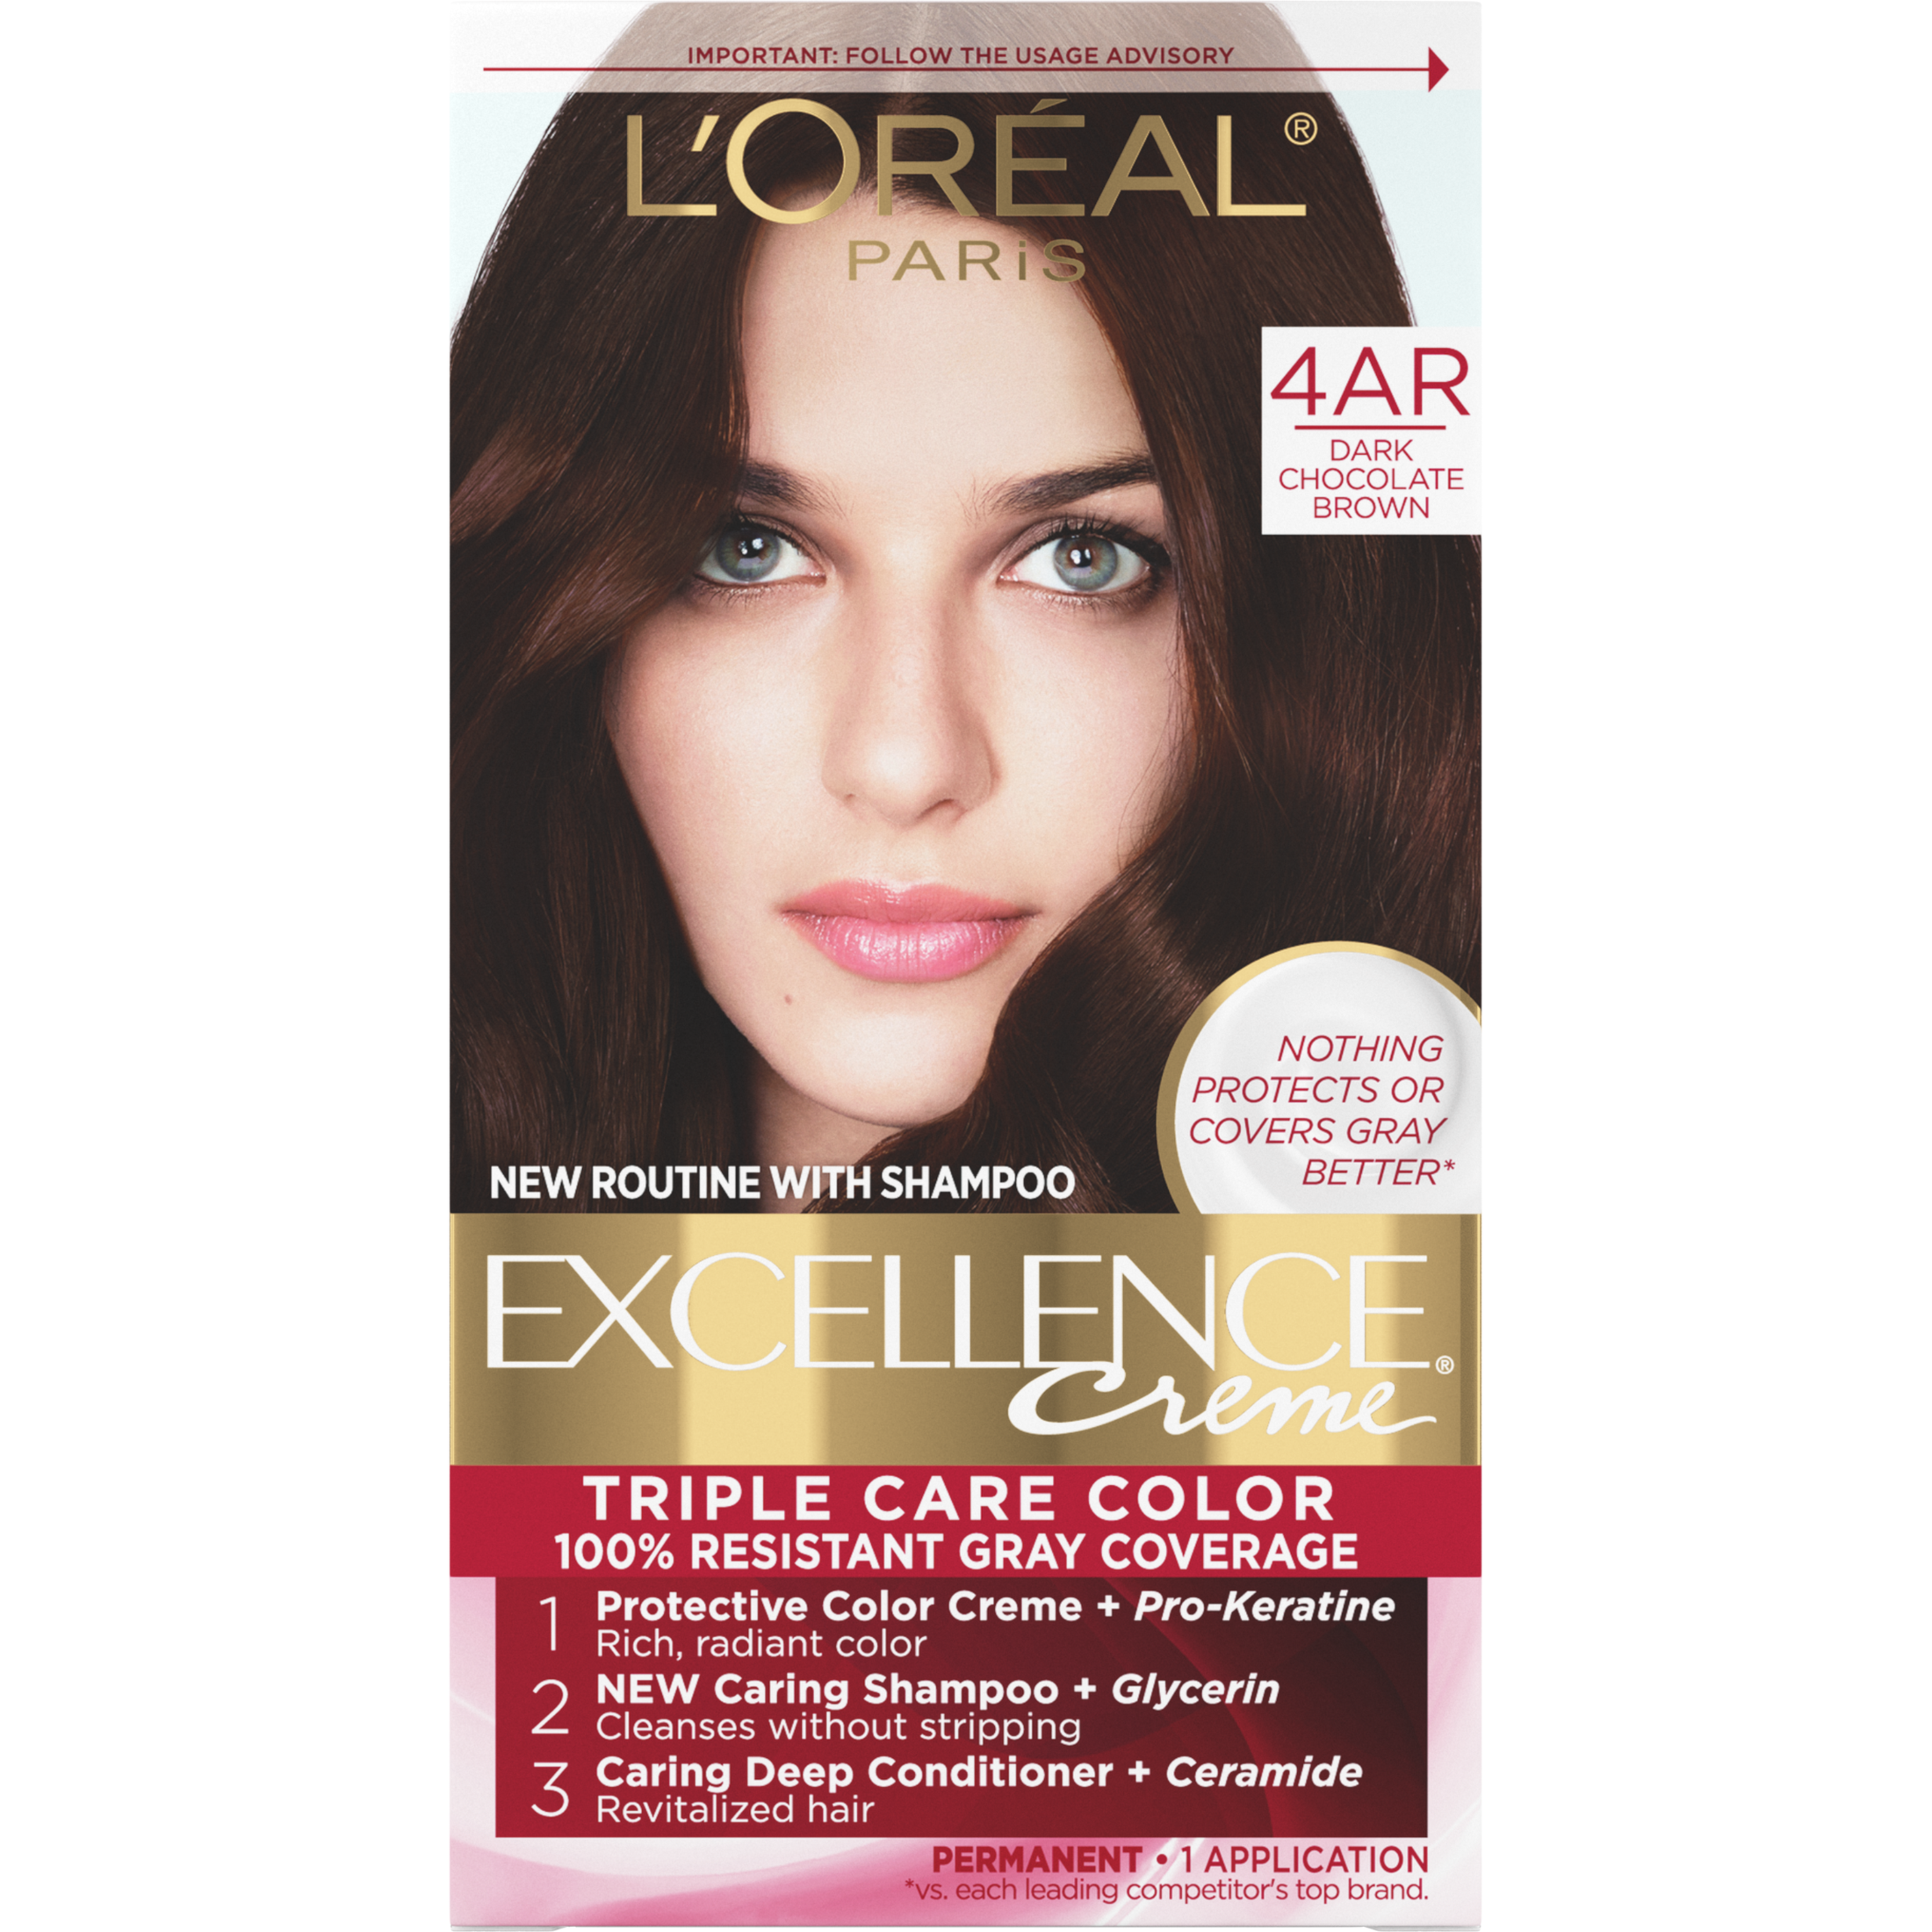 L'Oreal Paris Excellence Creme Permanent Hair Color, 4AR Dark Chocolate Brown - image 1 of 8